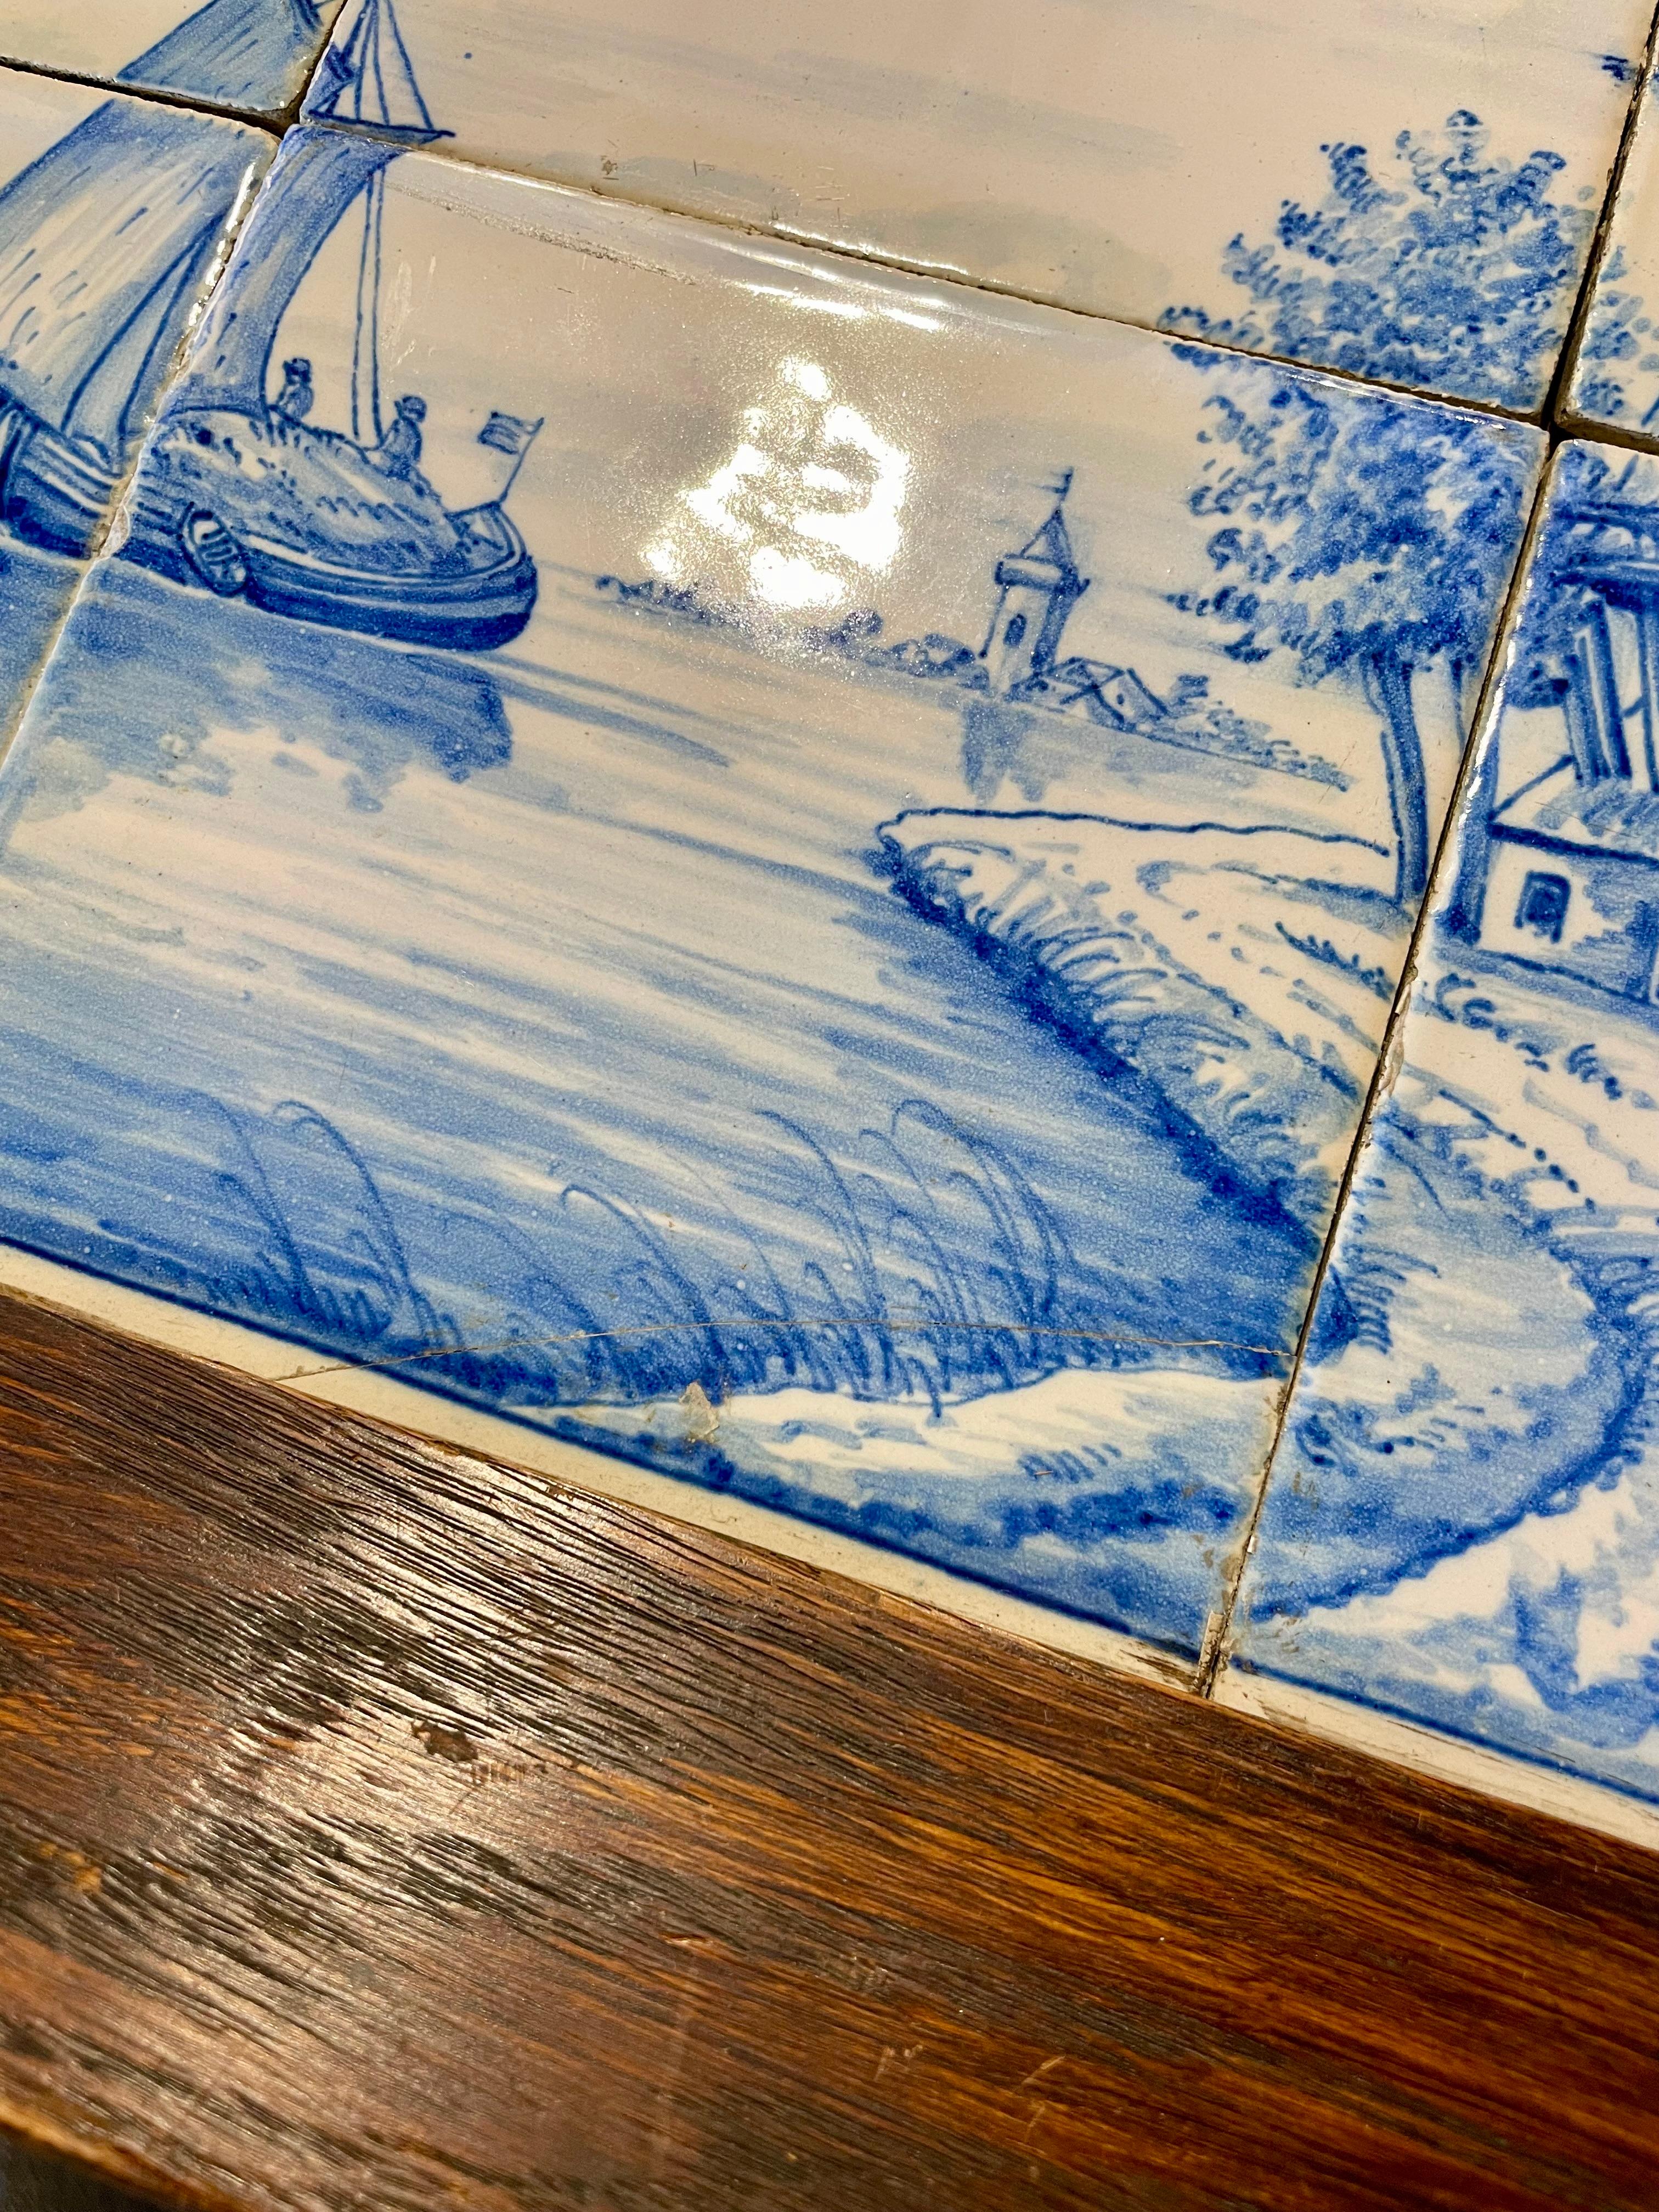 19th Century French Blue and White Painted Faience Delft Tile in Oak Frame 4